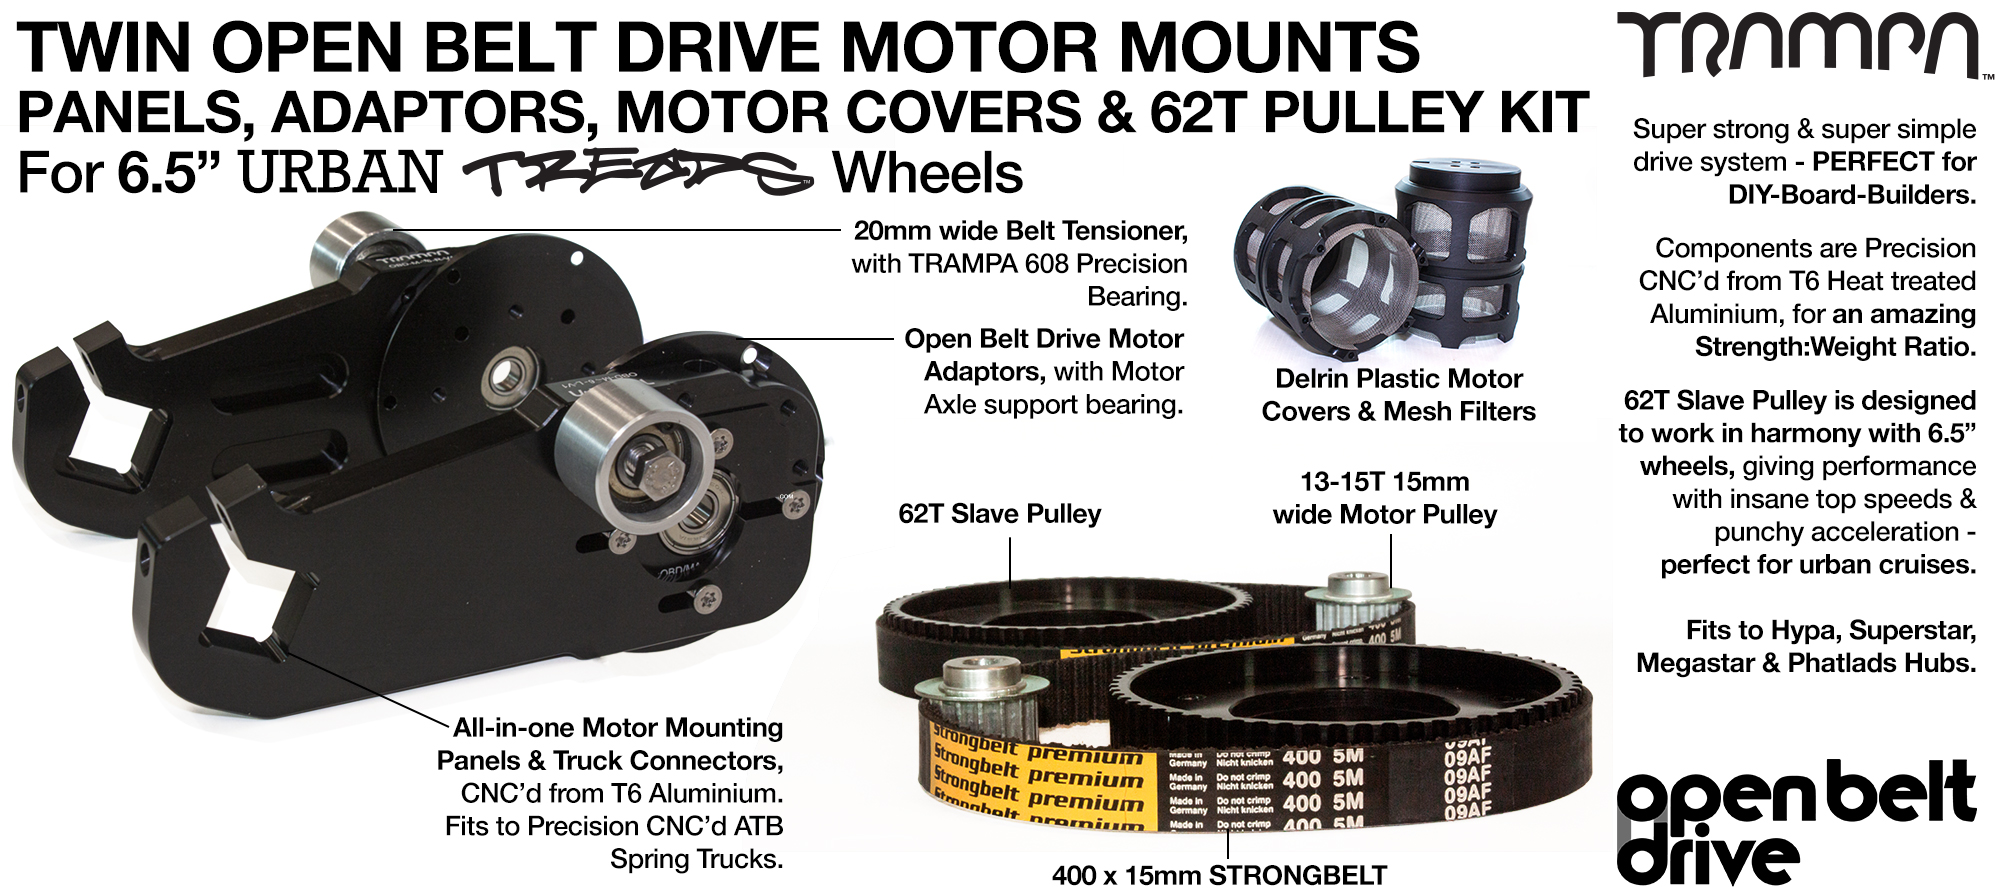 66T OBD Motor Mount with 62T Pulley kit & Motor Filters - TWIN